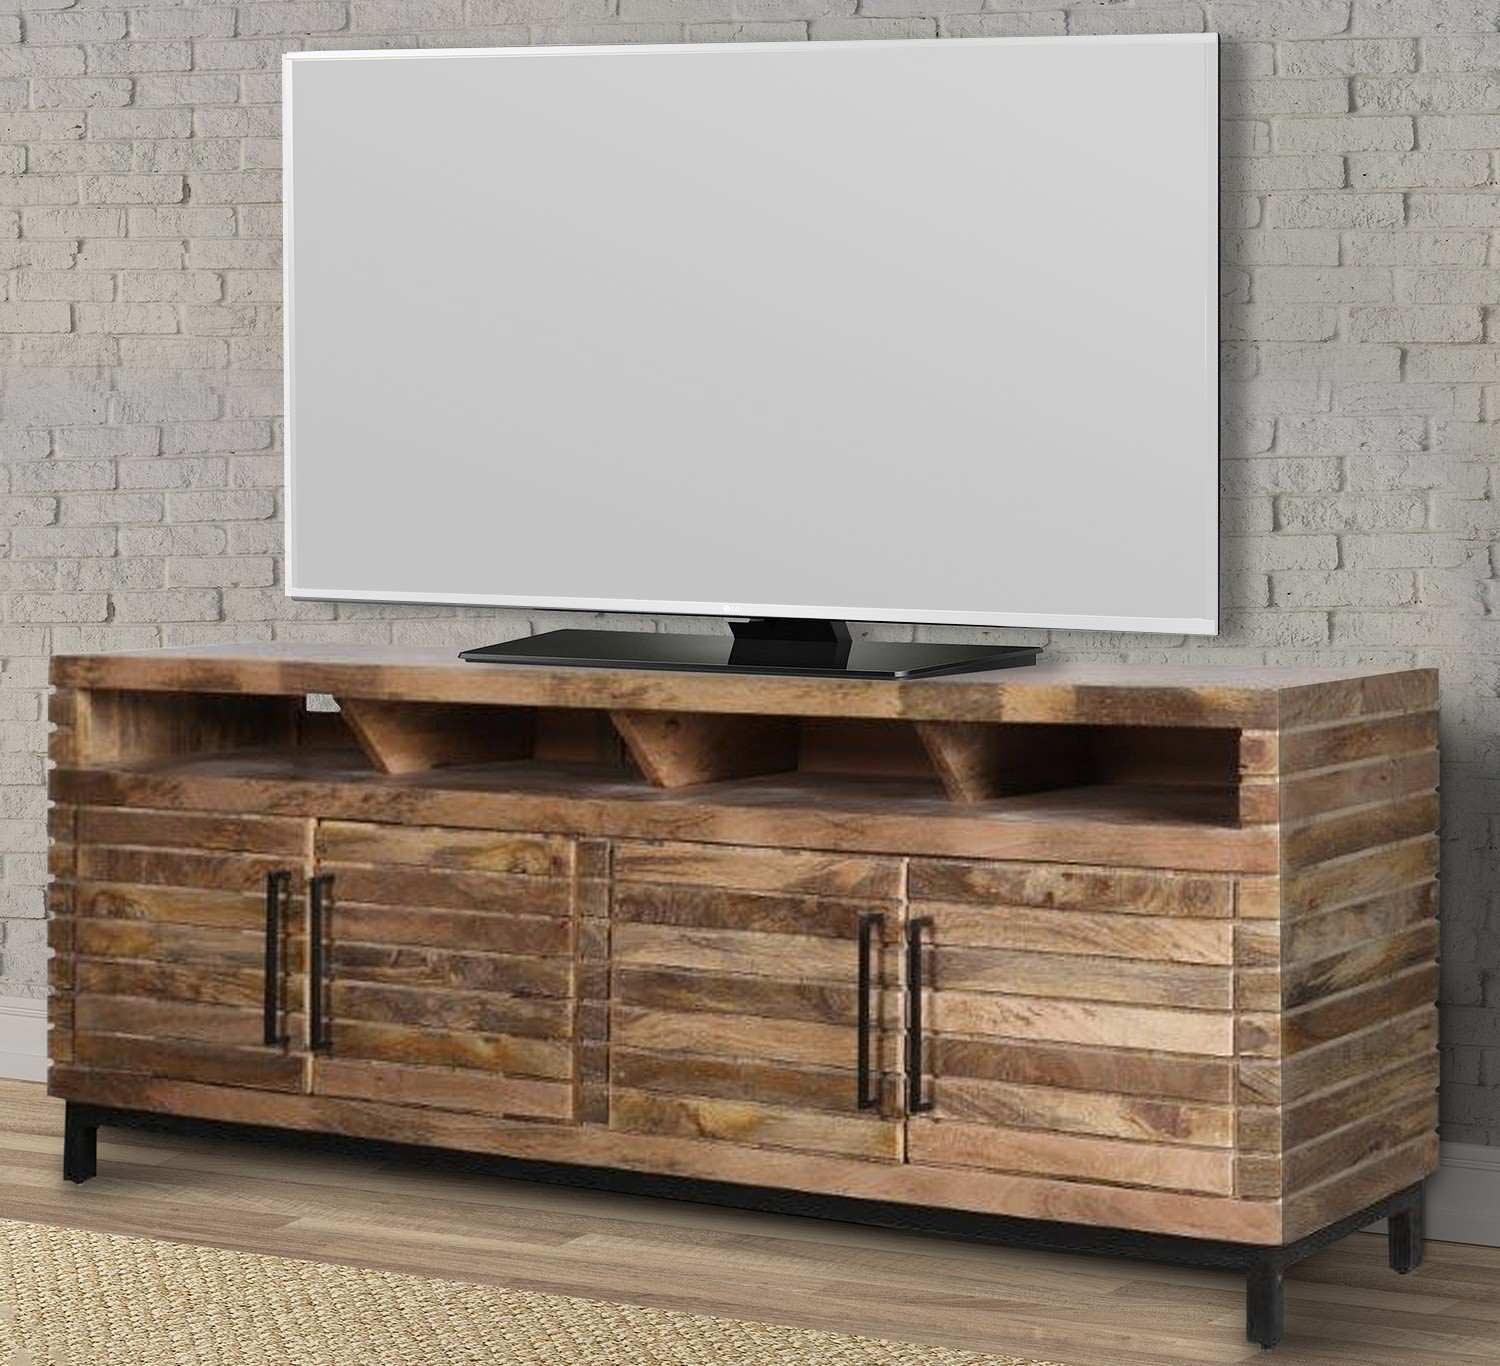 Parker House Crossings Downtown 86 Inch TV Console - Amber